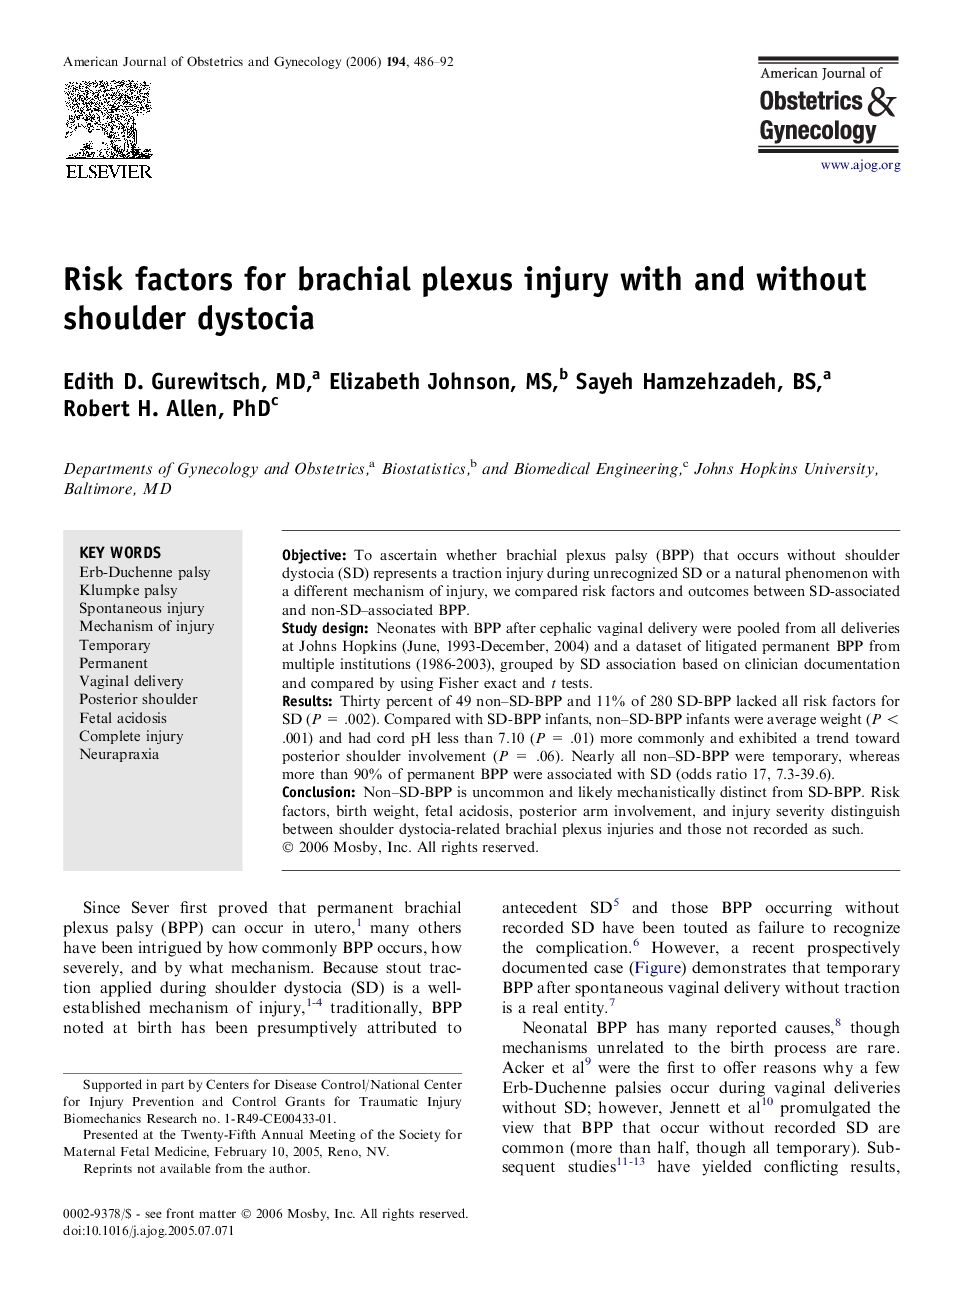 Risk factors for brachial plexus injury with and without shoulder dystocia 